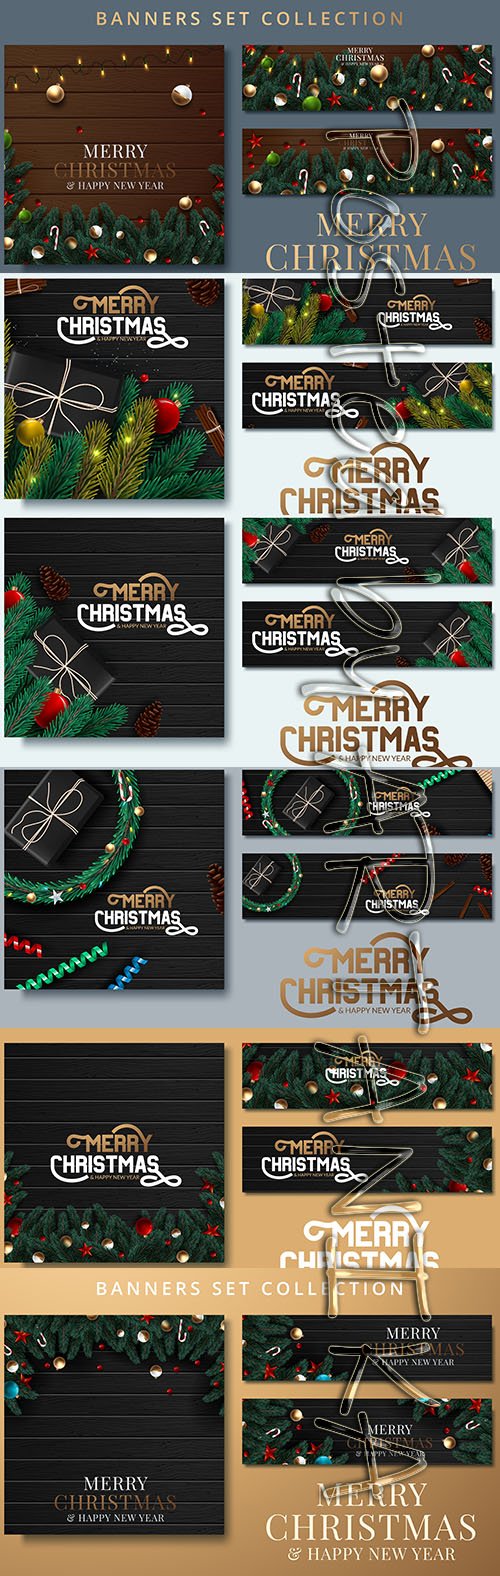 Collections of Christmas Decorated Banners Vol 2